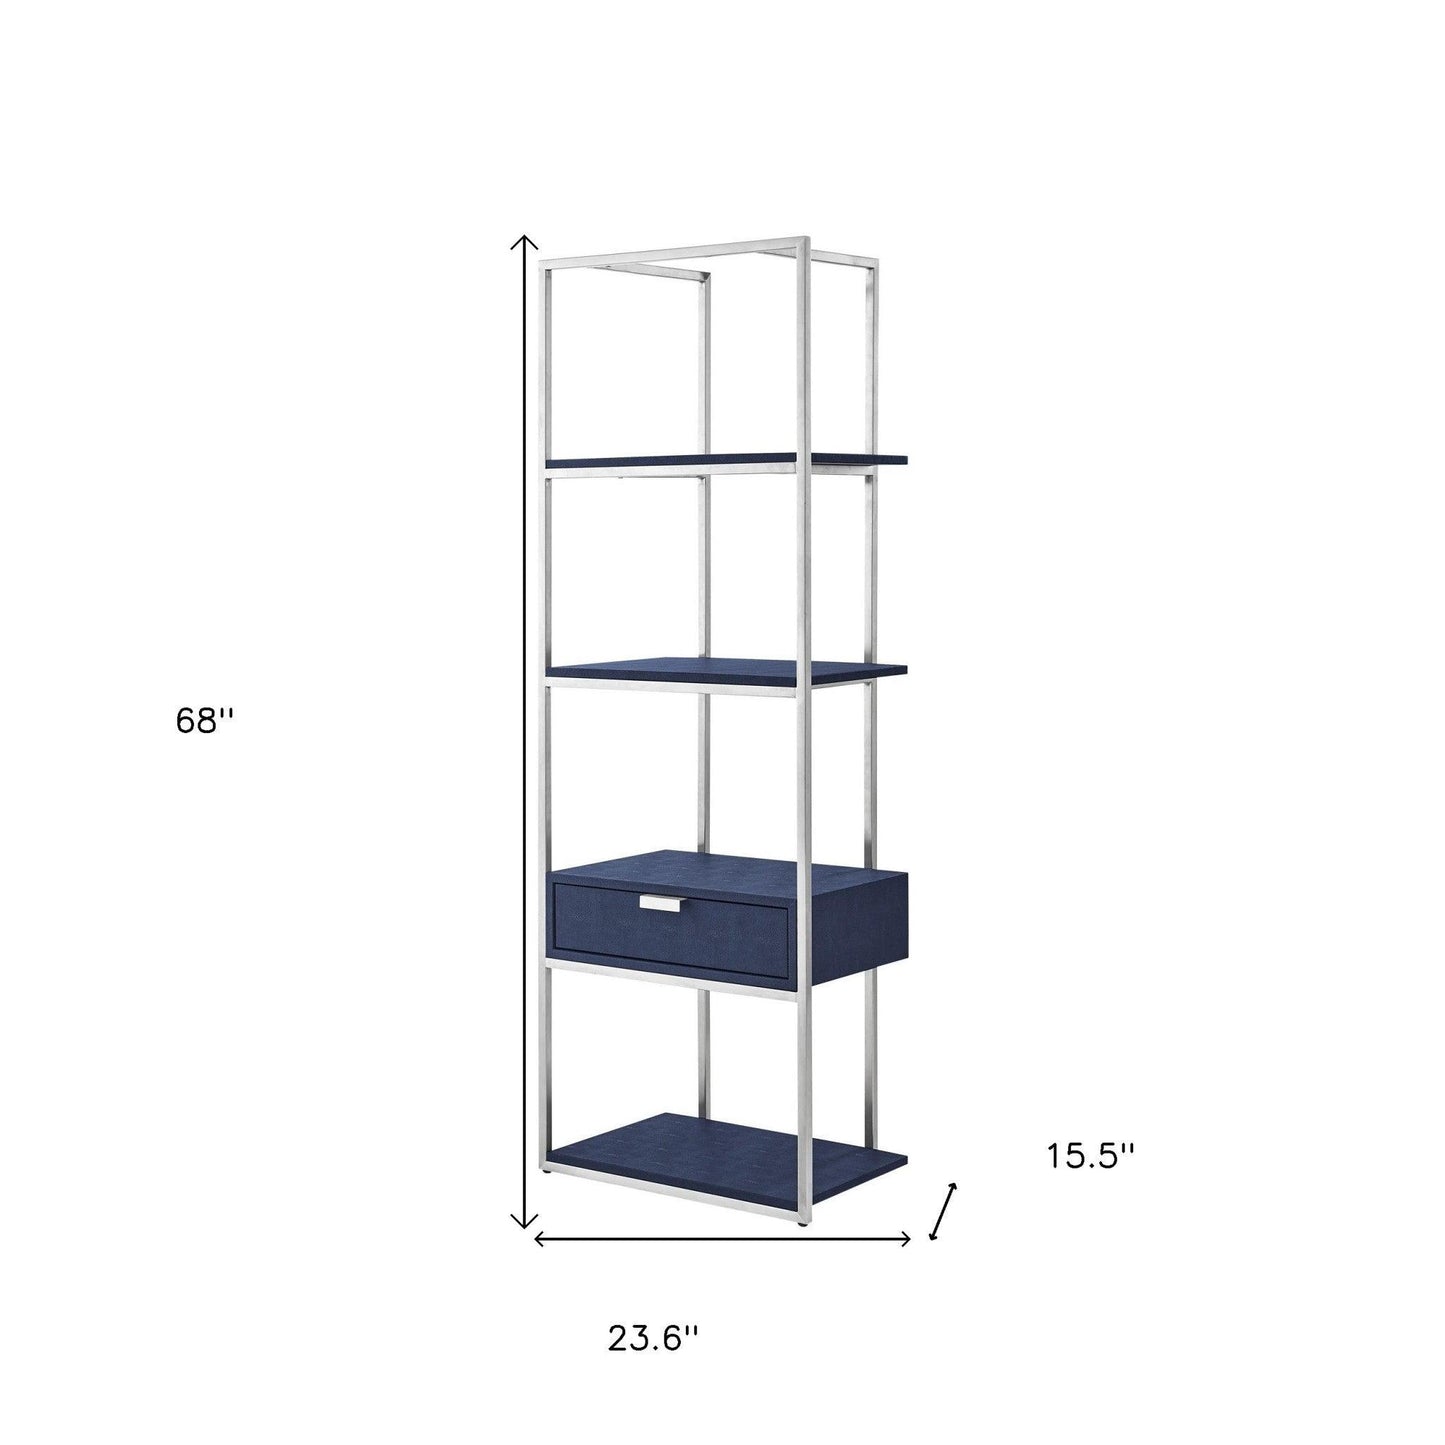 68" Cream Stainless Steel Four Tier Etagere Bookcase with a drawer - FurniFindUSA